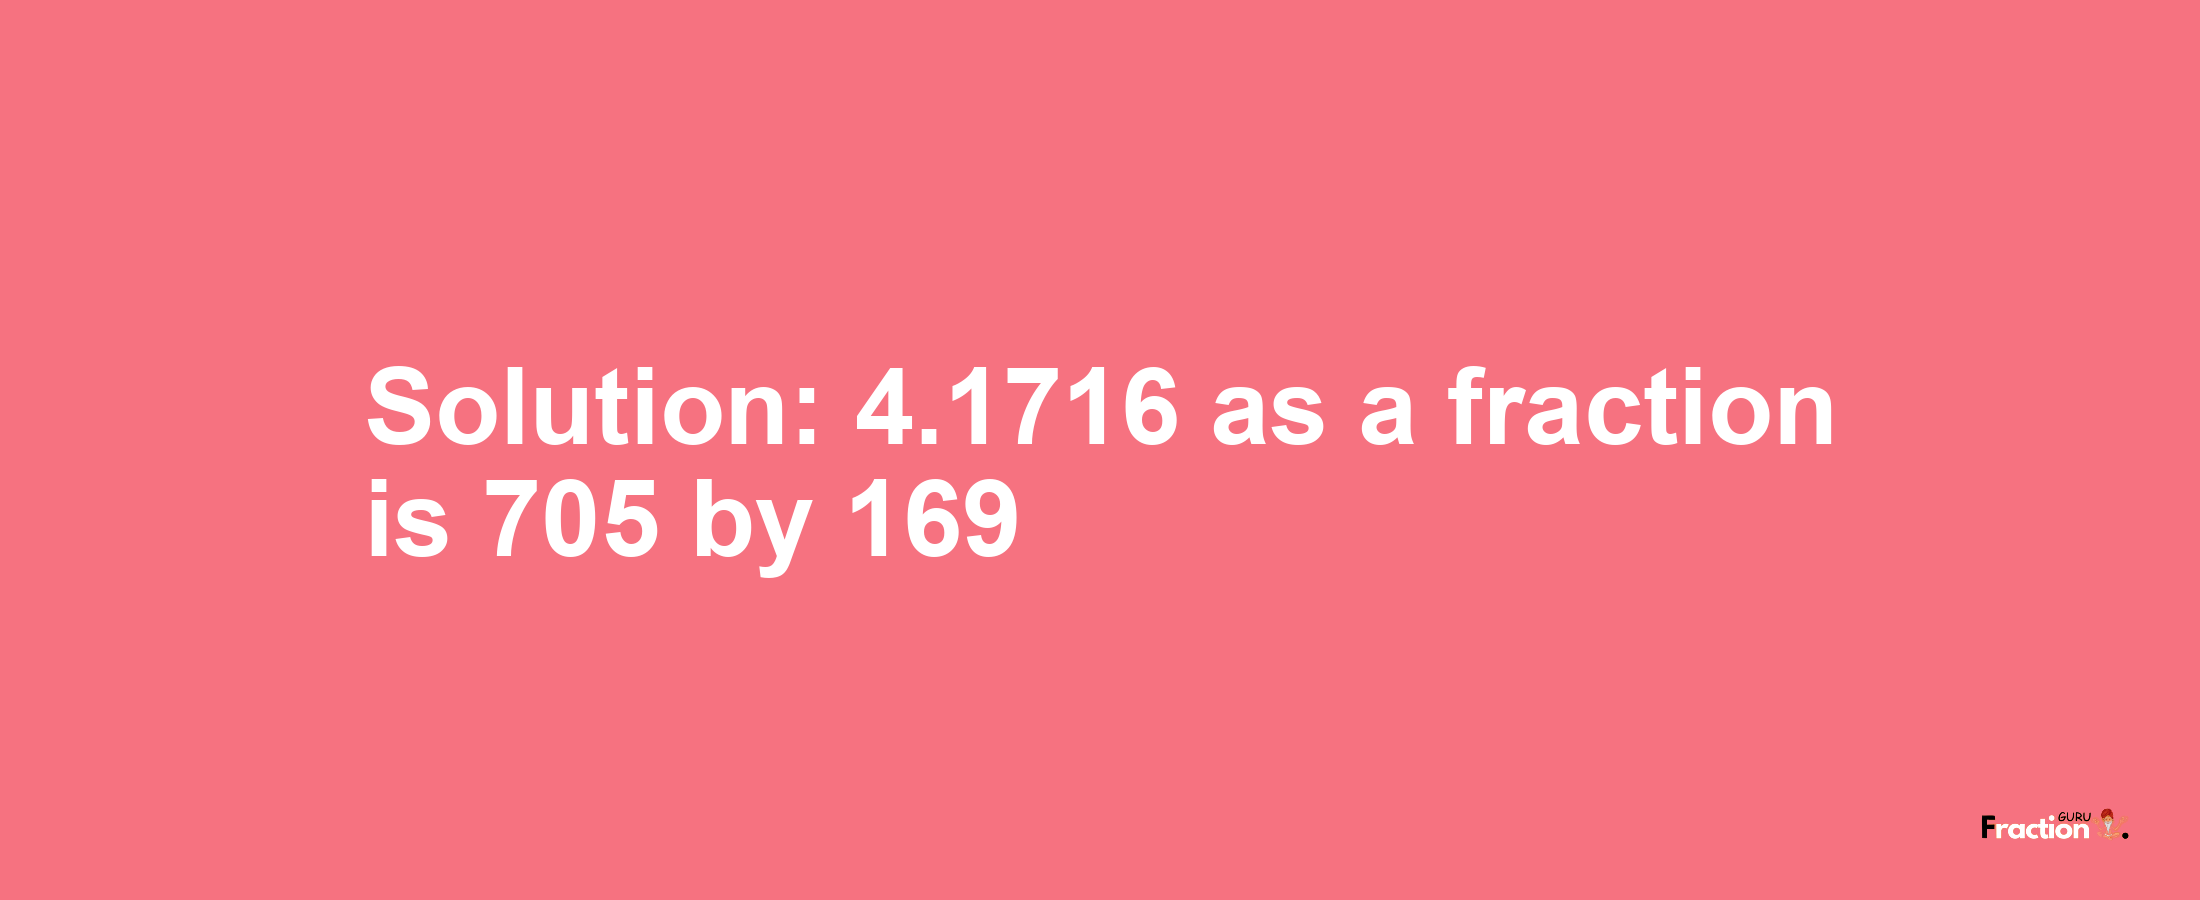 Solution:4.1716 as a fraction is 705/169